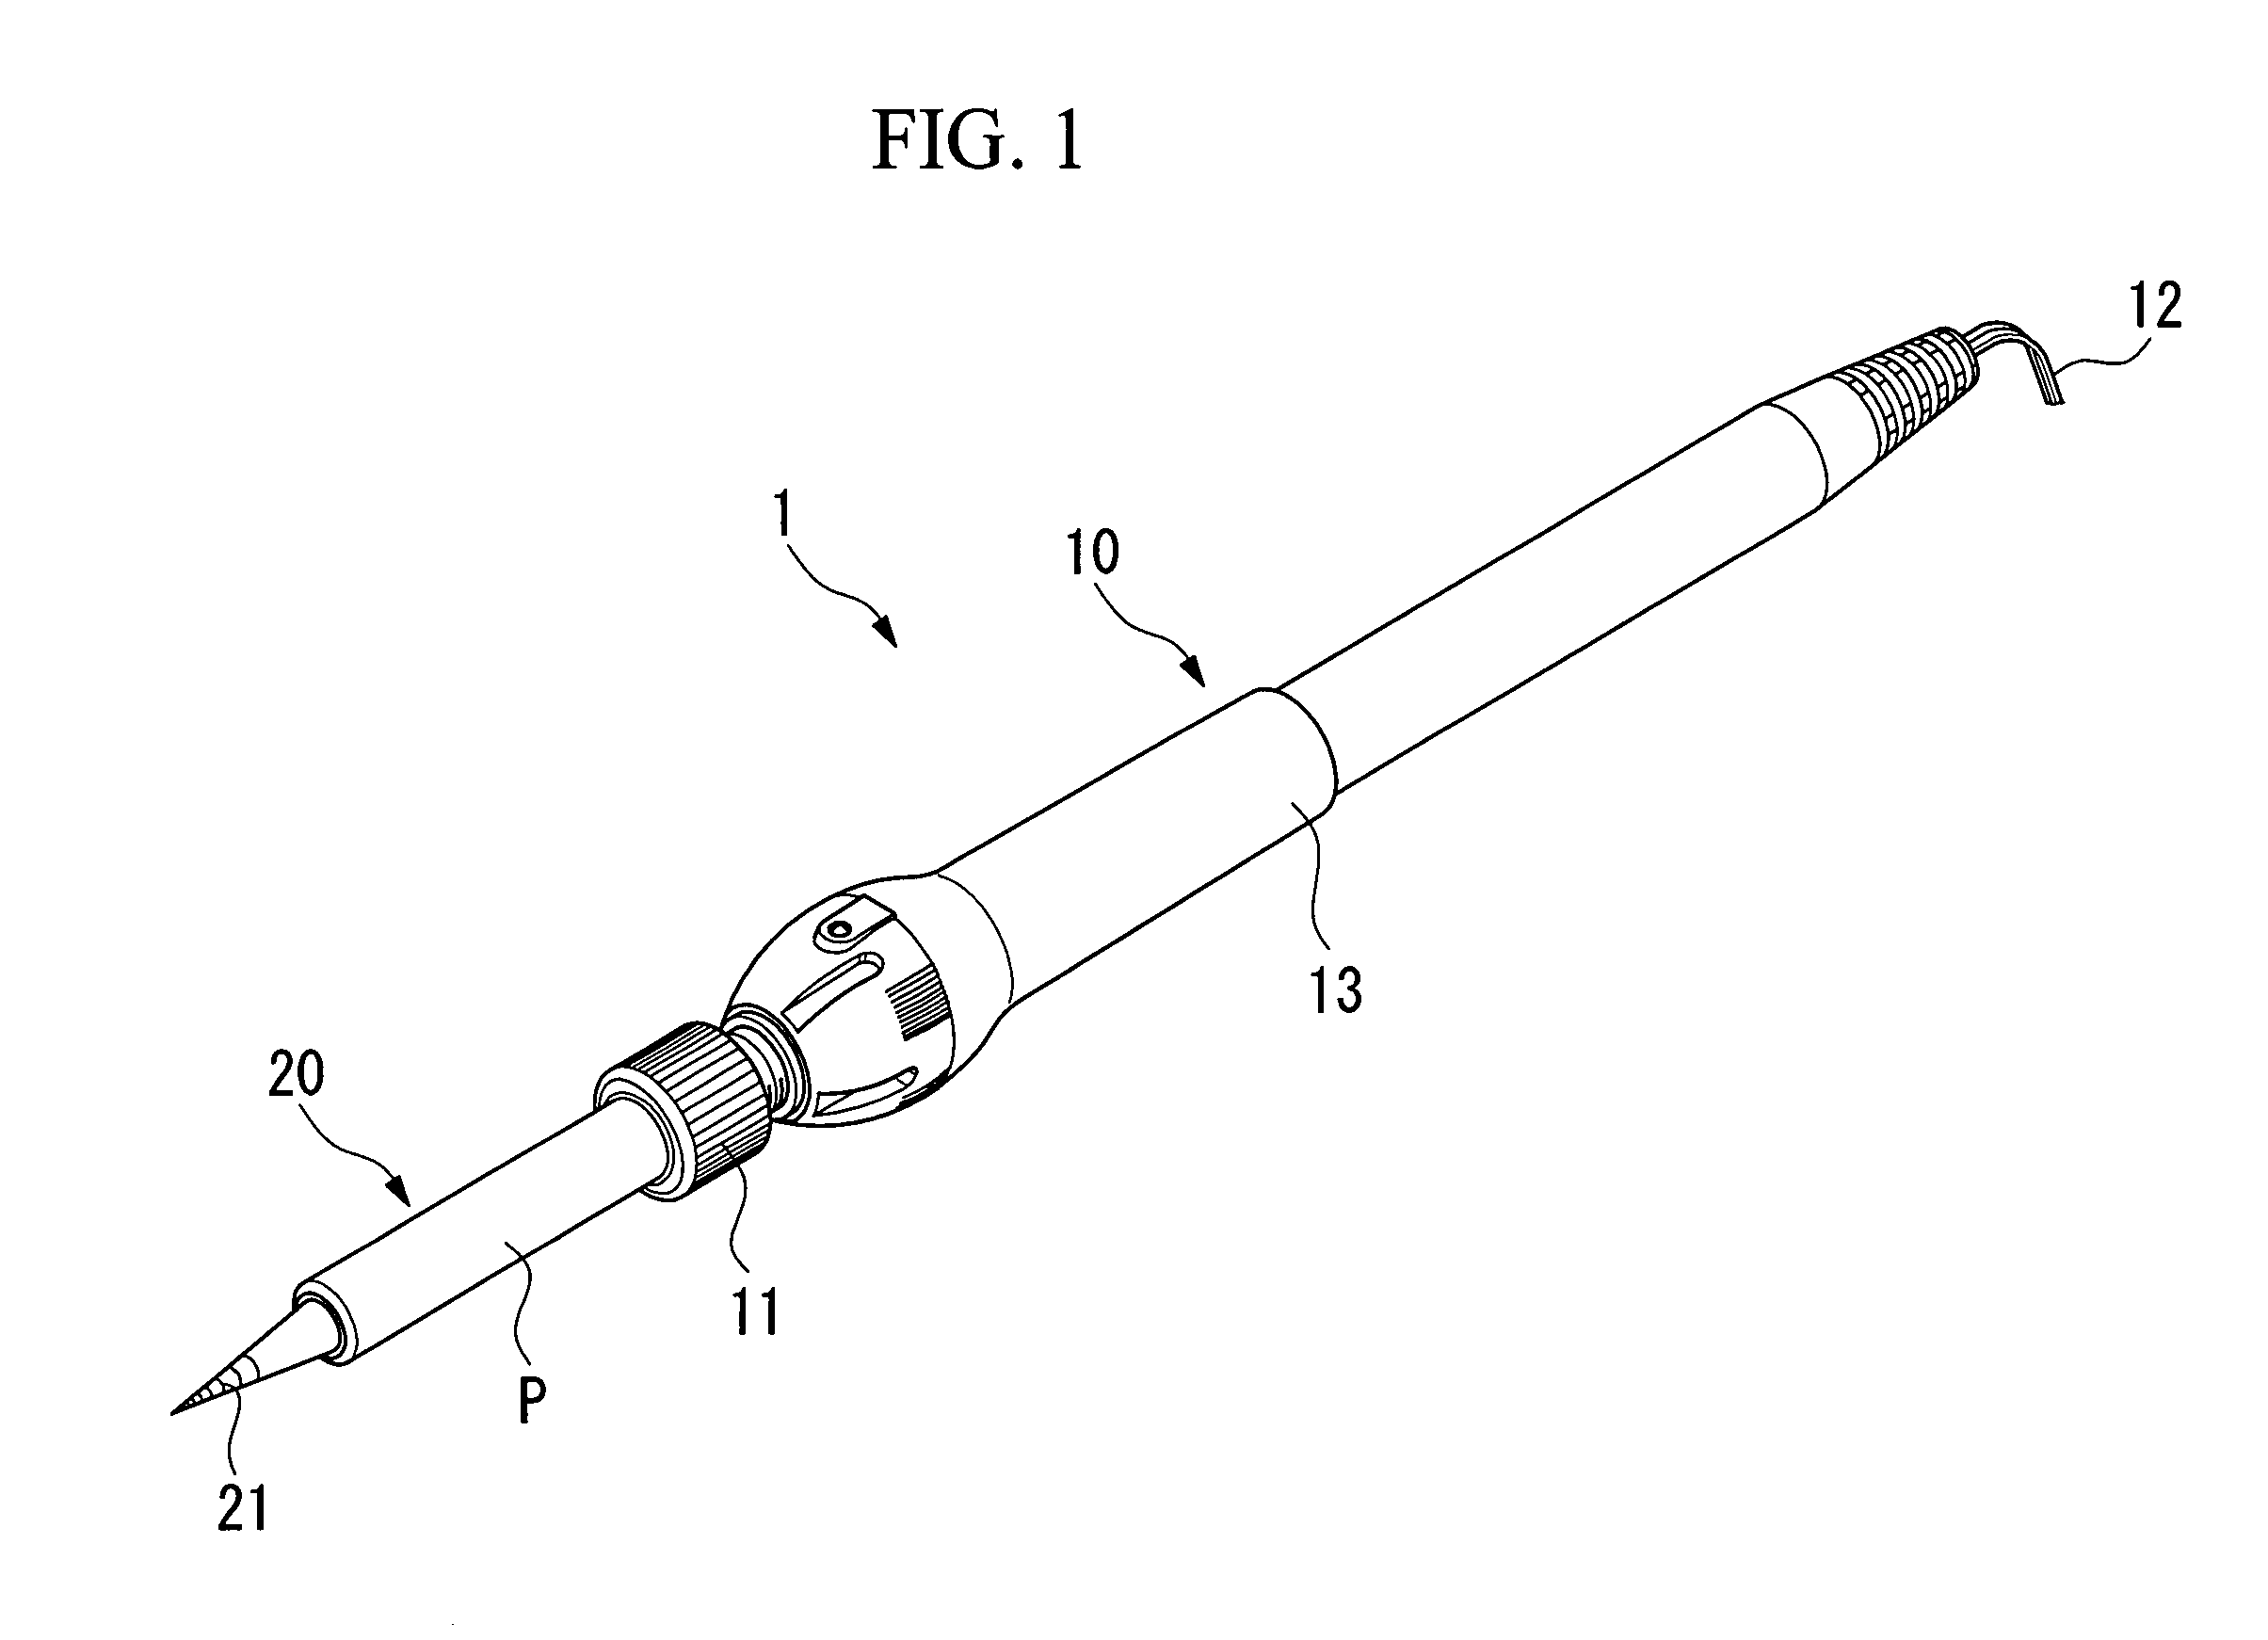 Soldering iron and method of manufacturing same